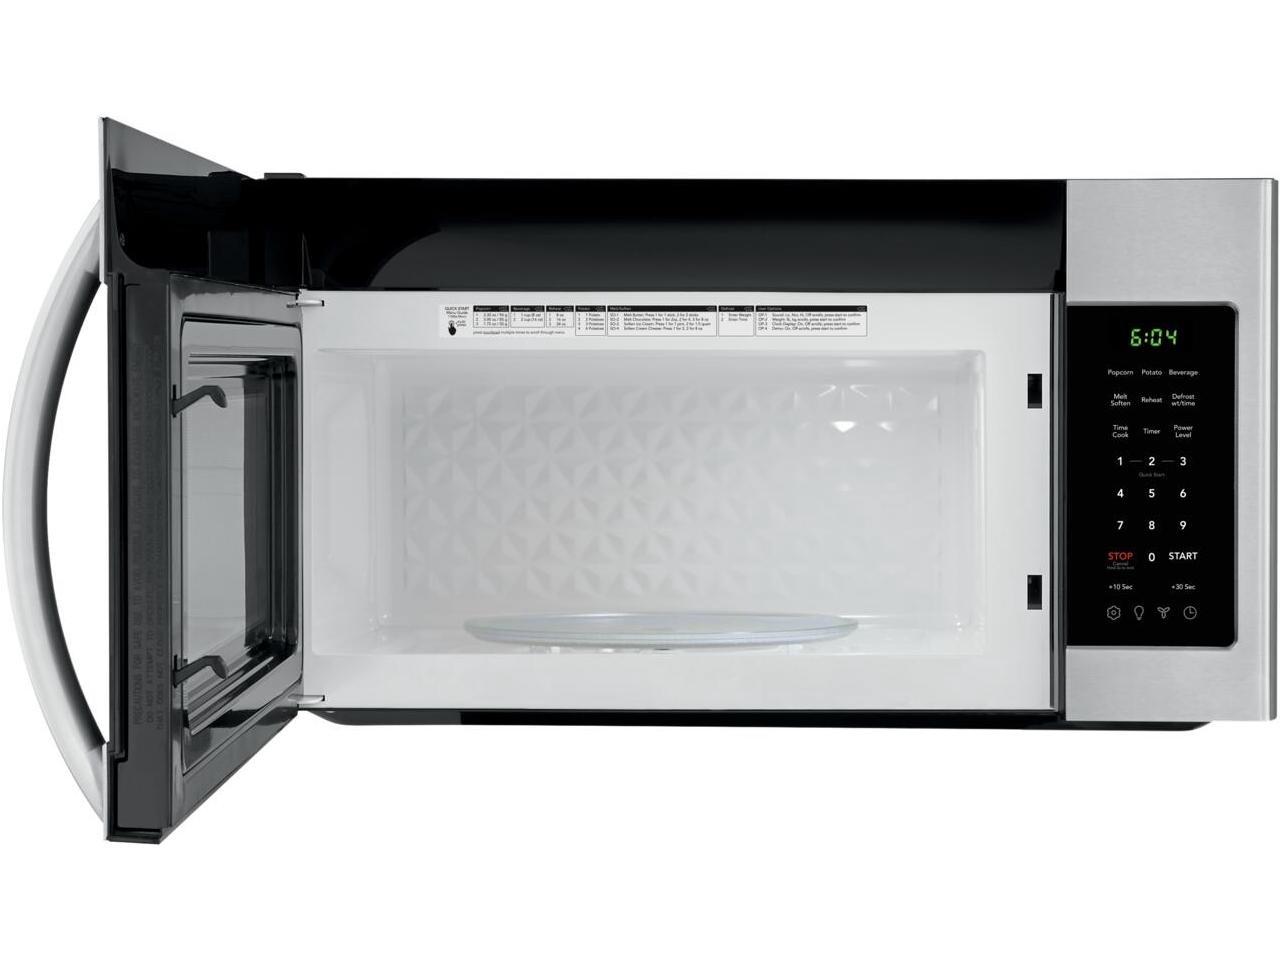 Frigidaire FFMV1846VS 1.6 Cu.Ft. Stainless Over-the-Range Microwave